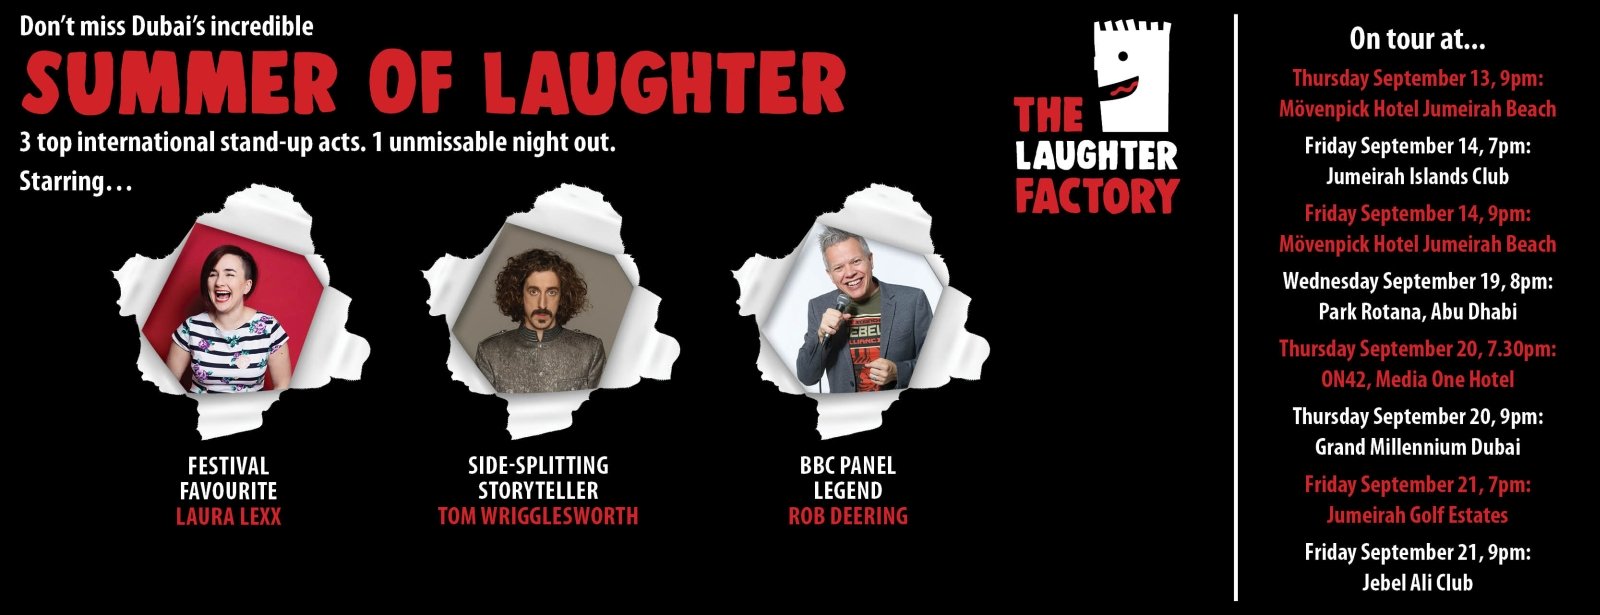 Summer of Laughter from the Laughter Factory - Coming Soon in UAE